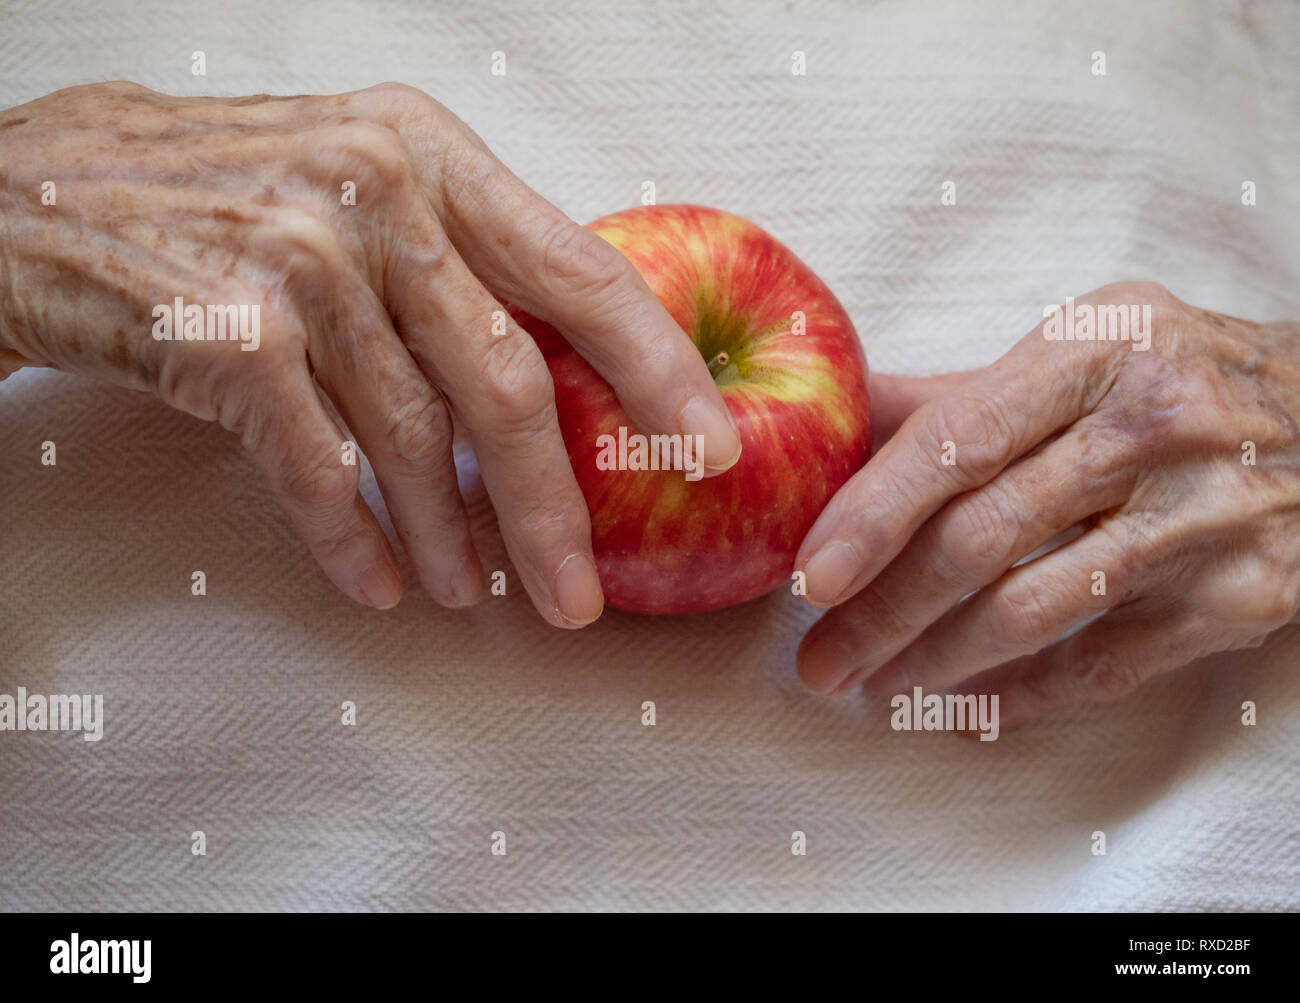 Elderly woman holding a ripe apple in her wrinkled hands against an off white background photographed from above. Stock Photo